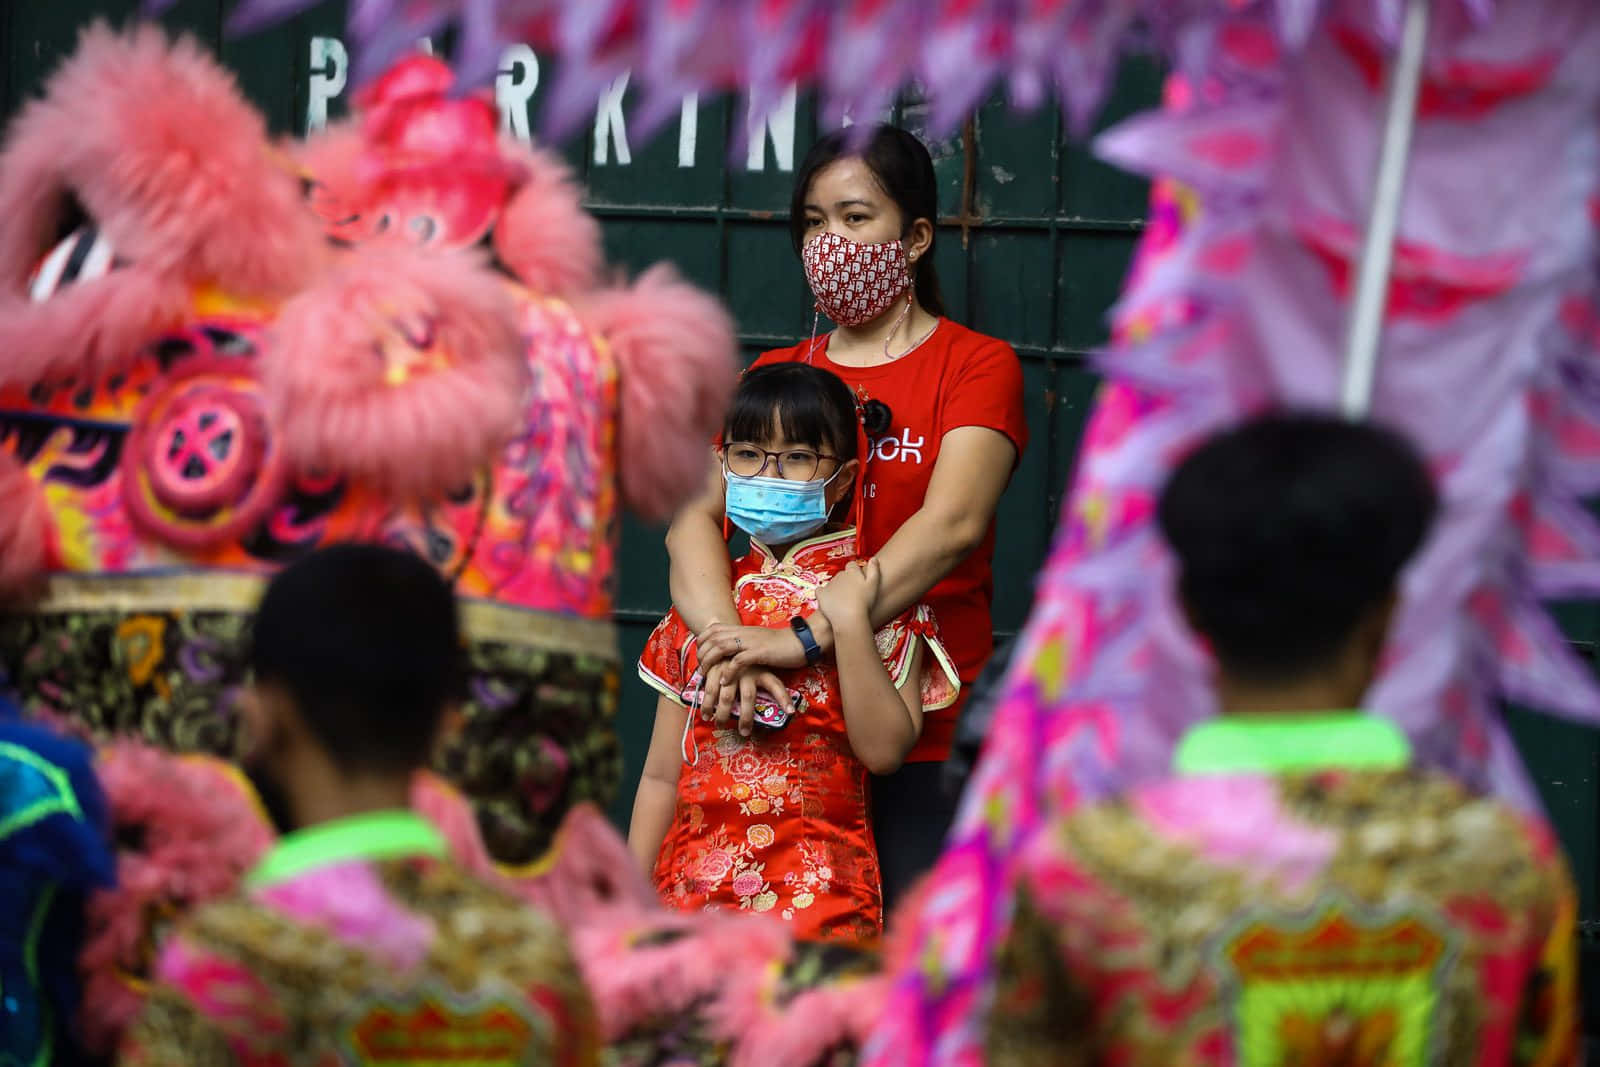 A Woman And Child Wearing Masks In A Chinese Festival